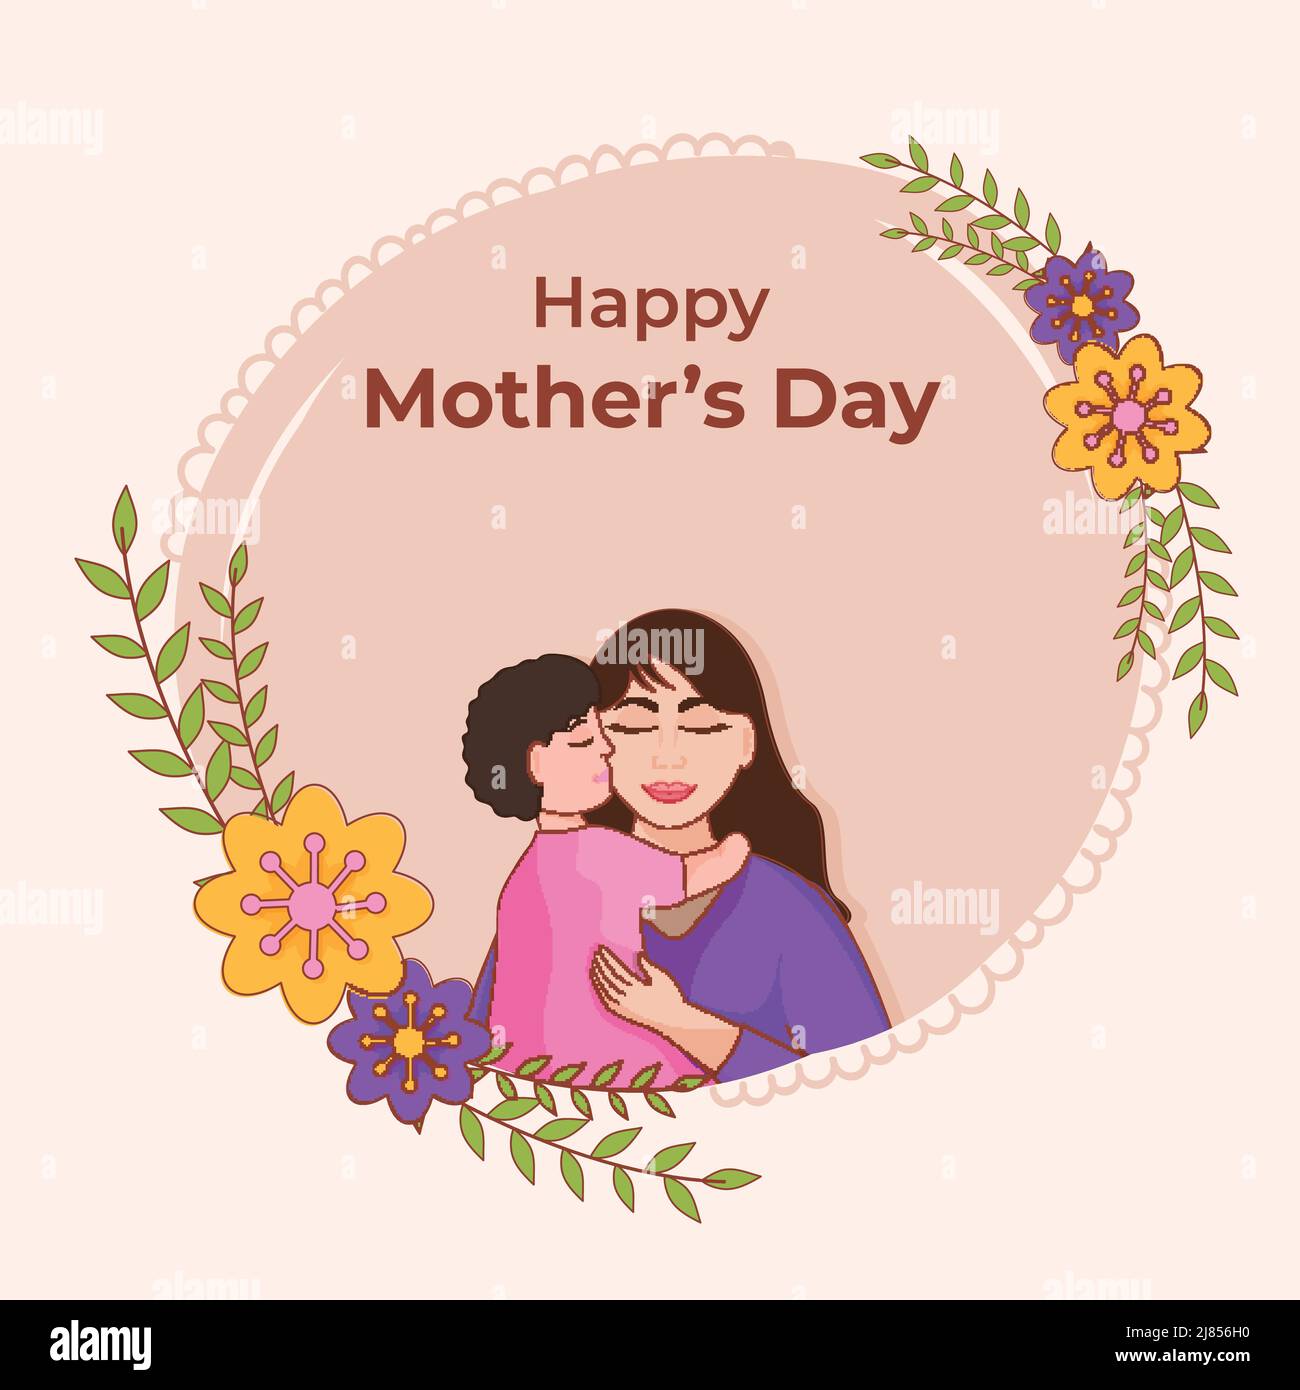 Happy Mother's Day Celebration Concept With Cute Baby Kissing Her Mom And Floral On Peach Background. Stock Vector